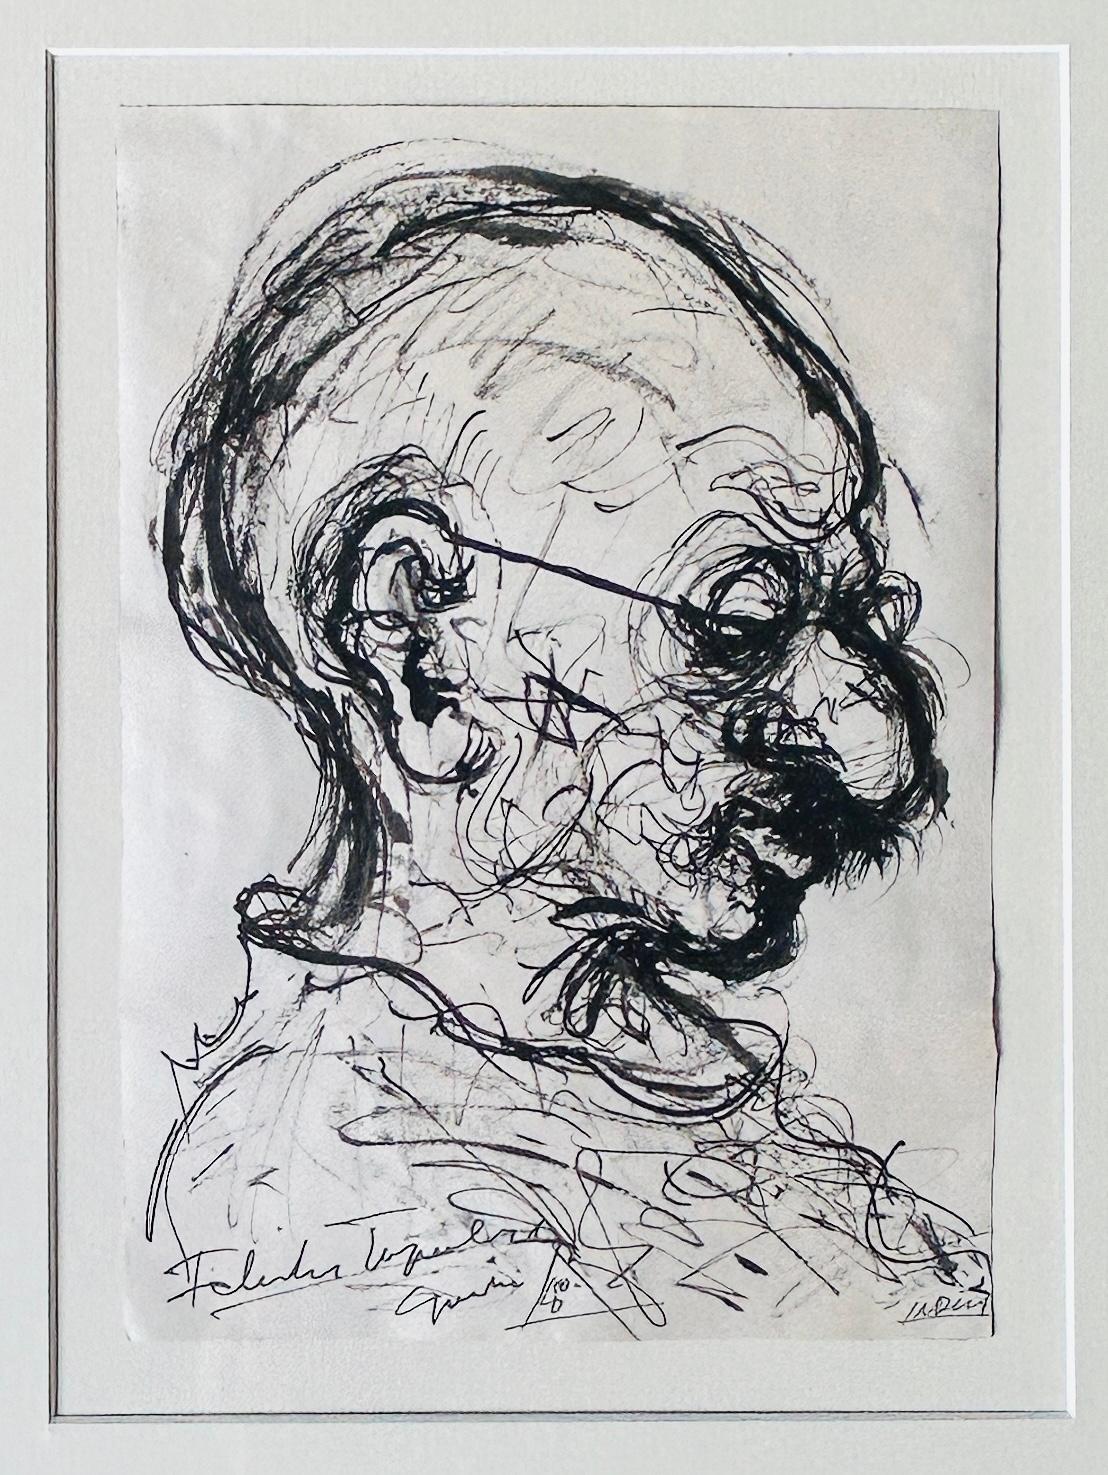 Felix Topolski (1907-1989)
Gandhi
Pen and ink on paper

Image 10.5” x 7.5”, Framed 26” x 21.5”
Signed and Dated 1950, India

Provenance: Private UK Collection

Felix Topolski (1907-1989) was one of the 20th century’s great documentary artists. His